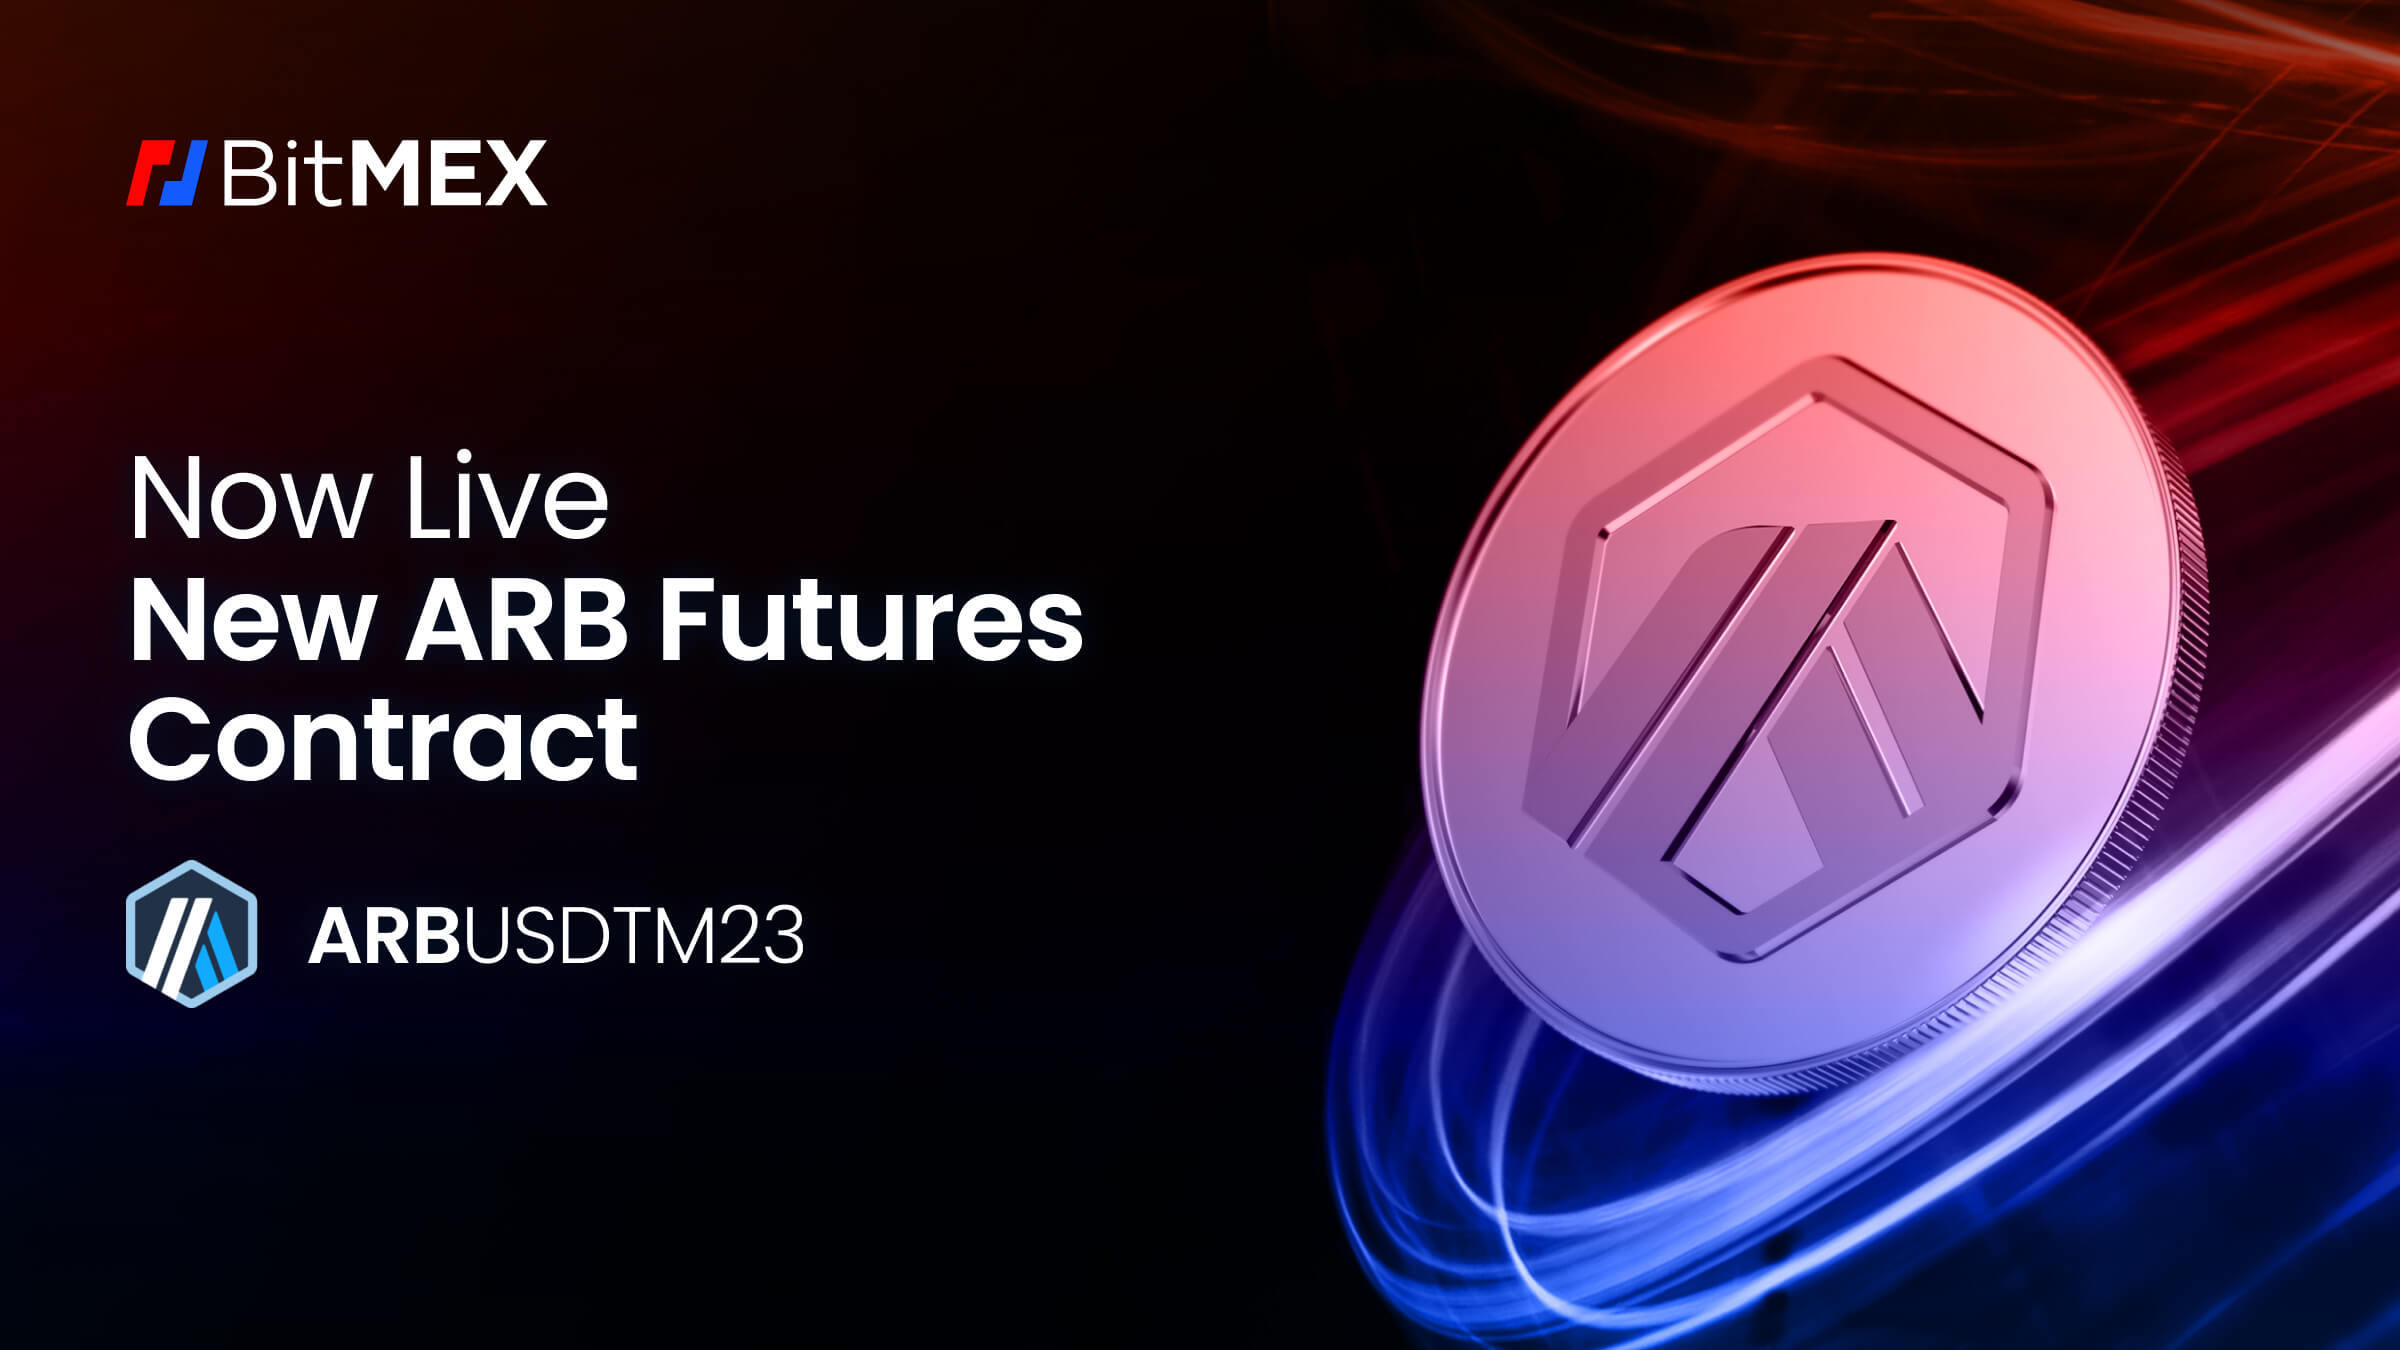 Now Live New ARB Futures Contract_1200x675_EN (1)